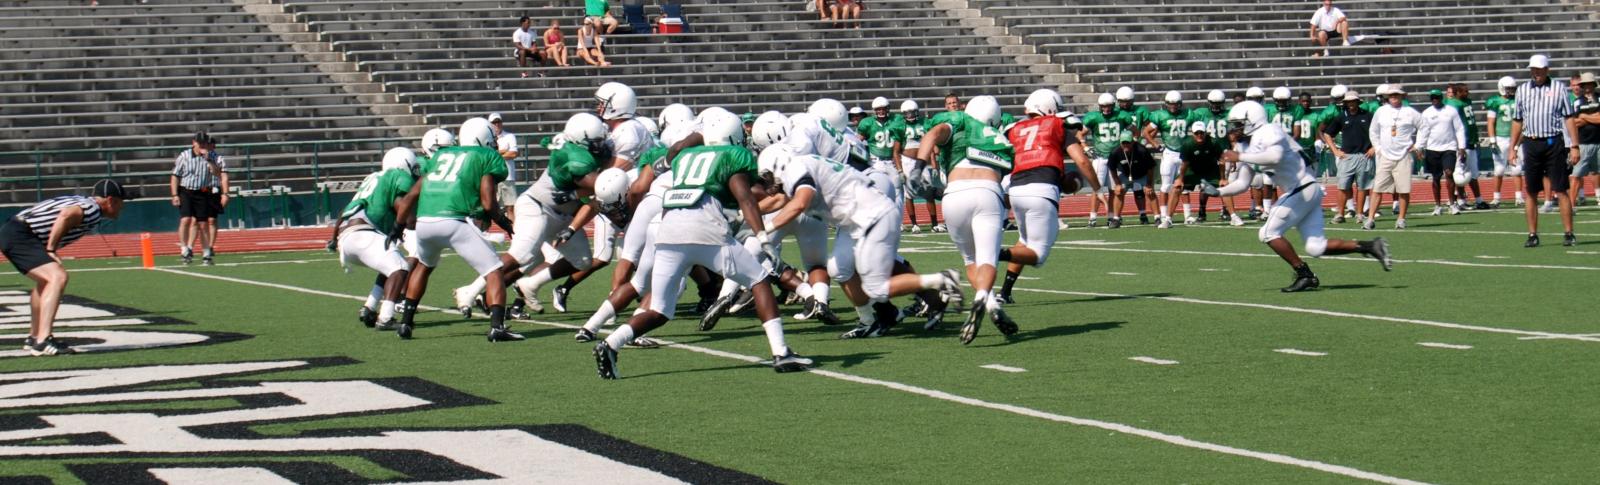 Mean Green 1st Scrimmage 2011